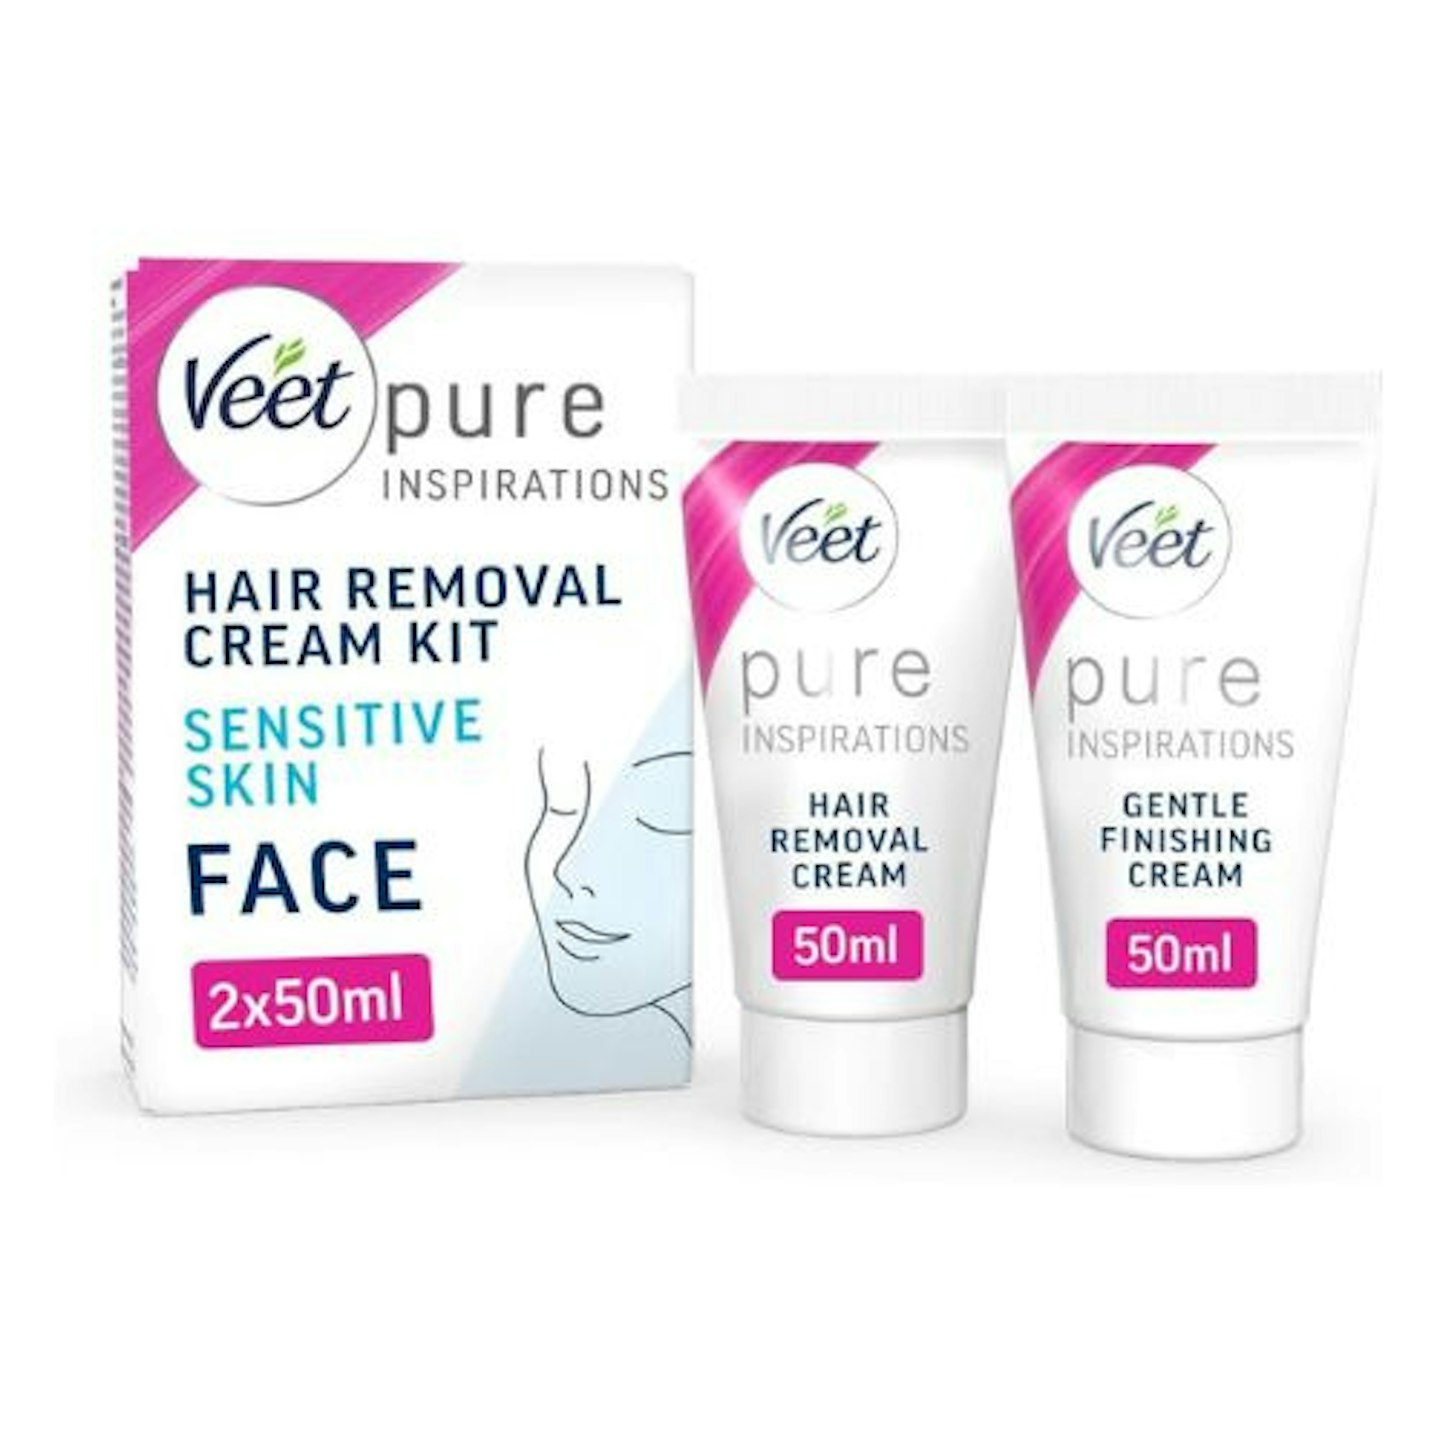 Veet Pure Face Hair Removal Cream Kit